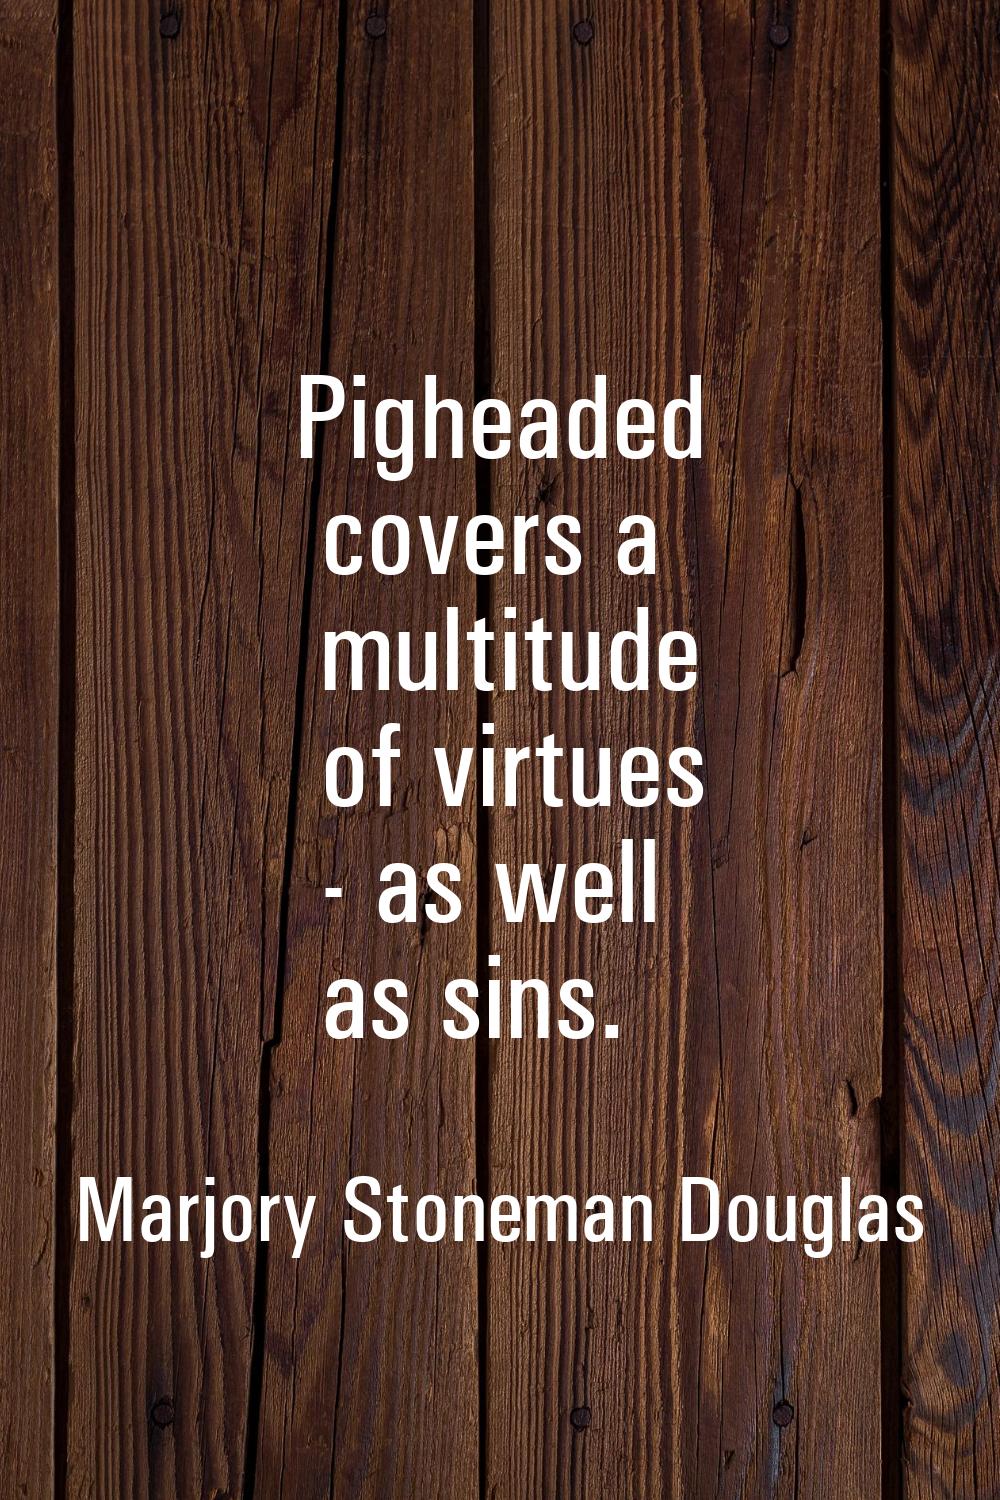 Pigheaded covers a multitude of virtues - as well as sins.